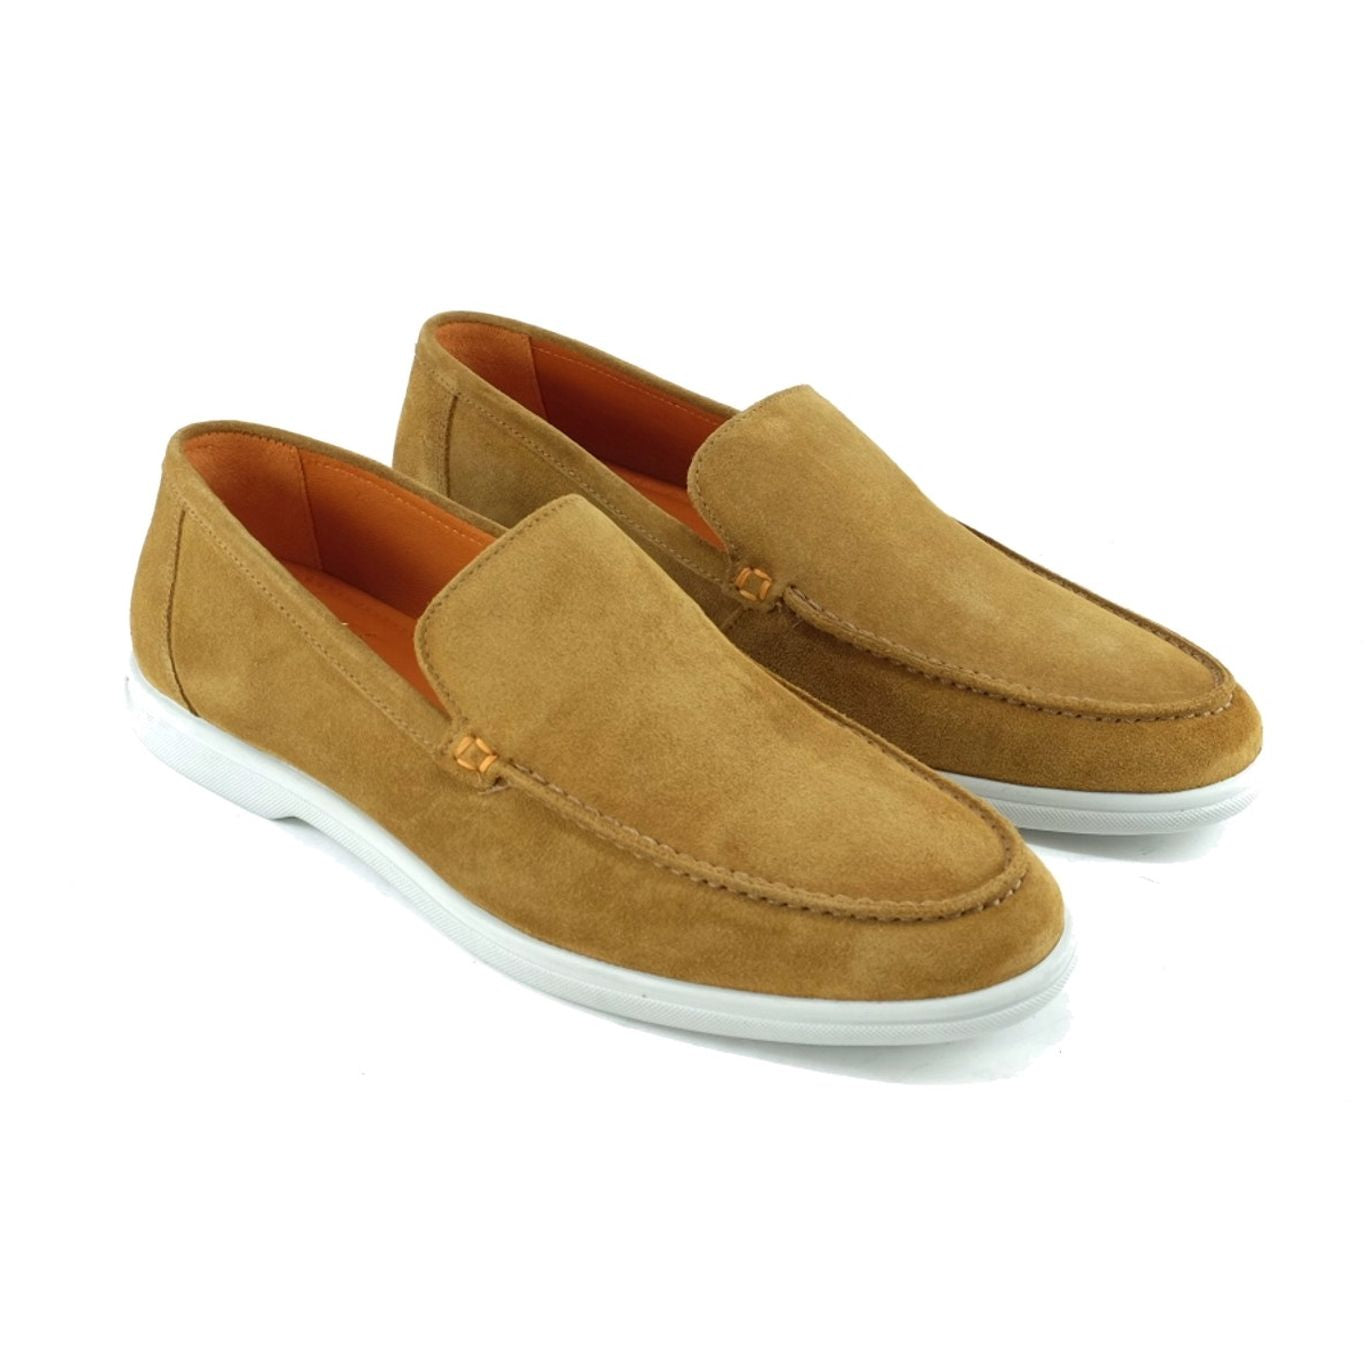 Rio Casual Suede Loafer in Khaki by Alan Payne Footwear